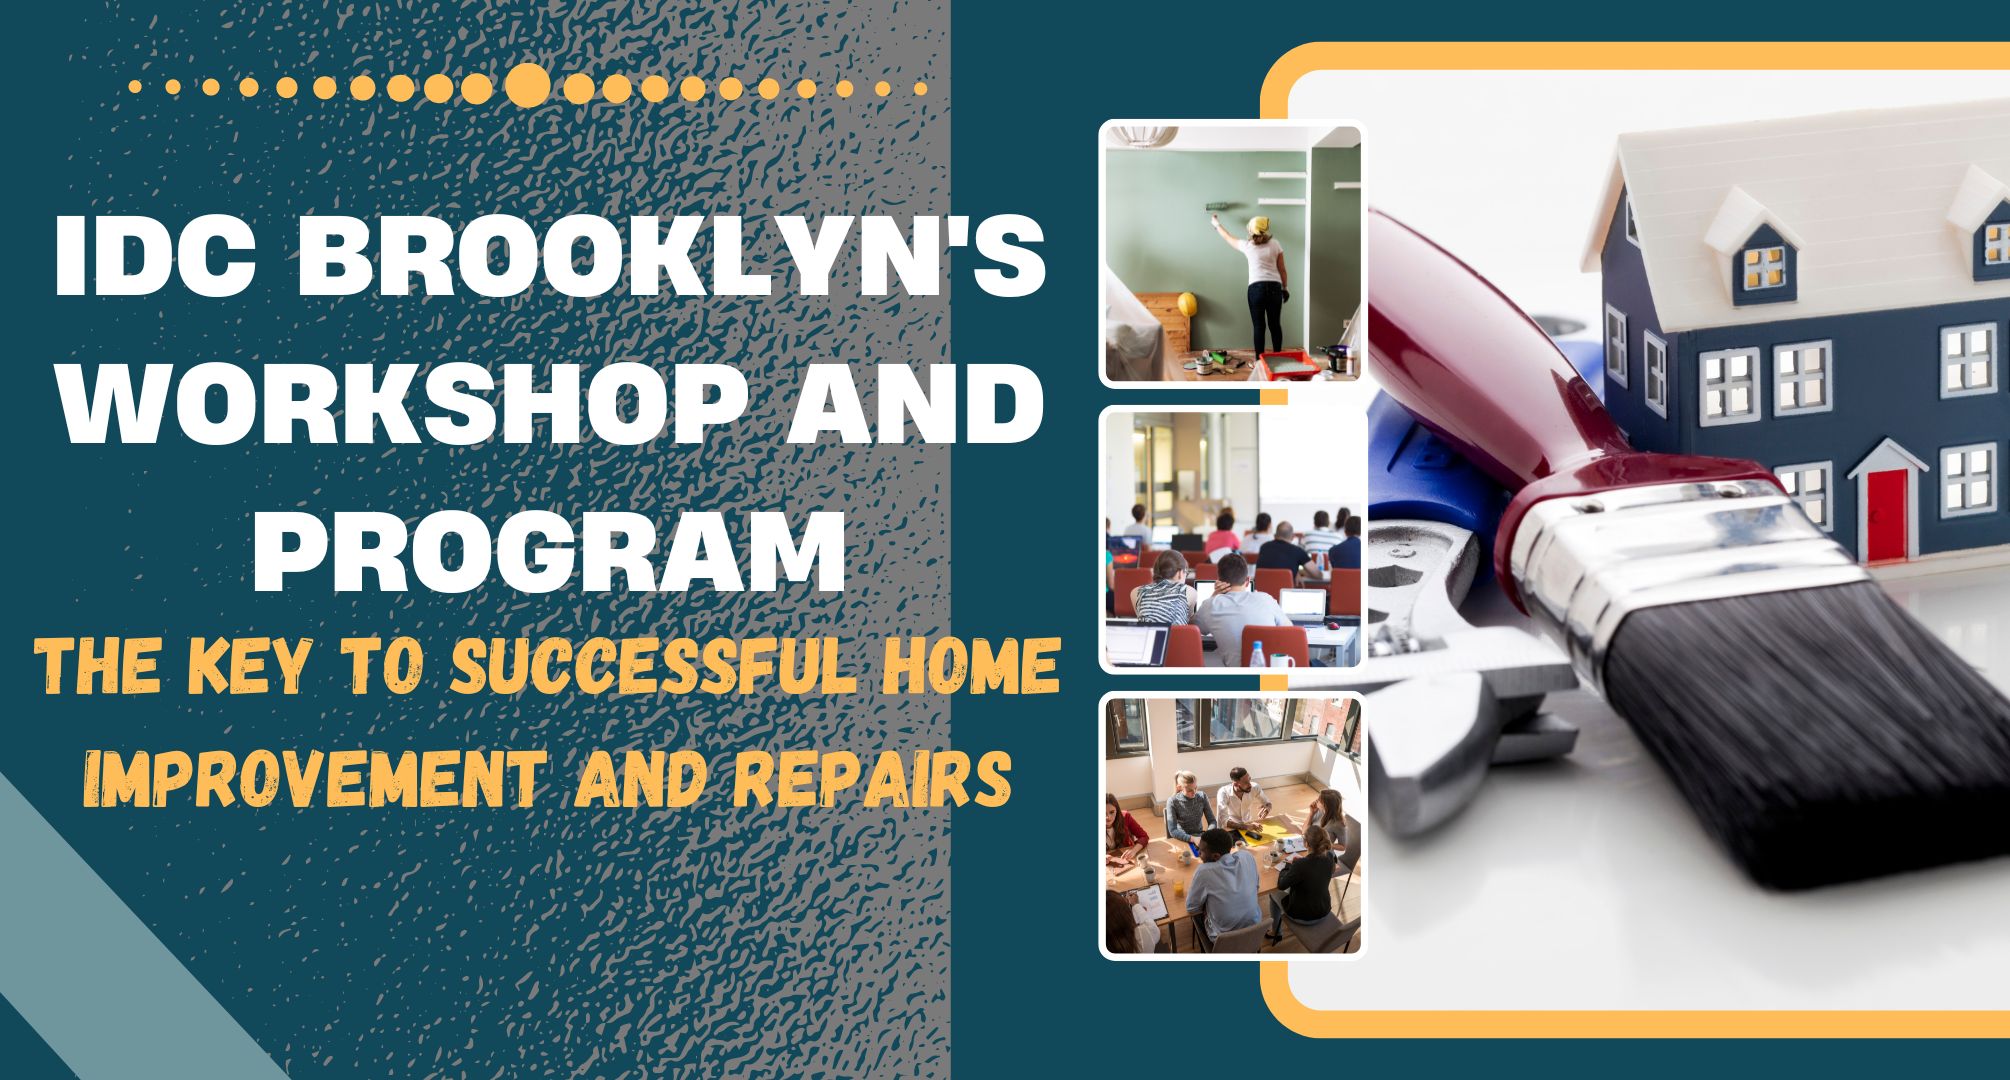 IDC Brooklyn’s Workshop and Program: The Key to Successful Home Improvement and Repairs